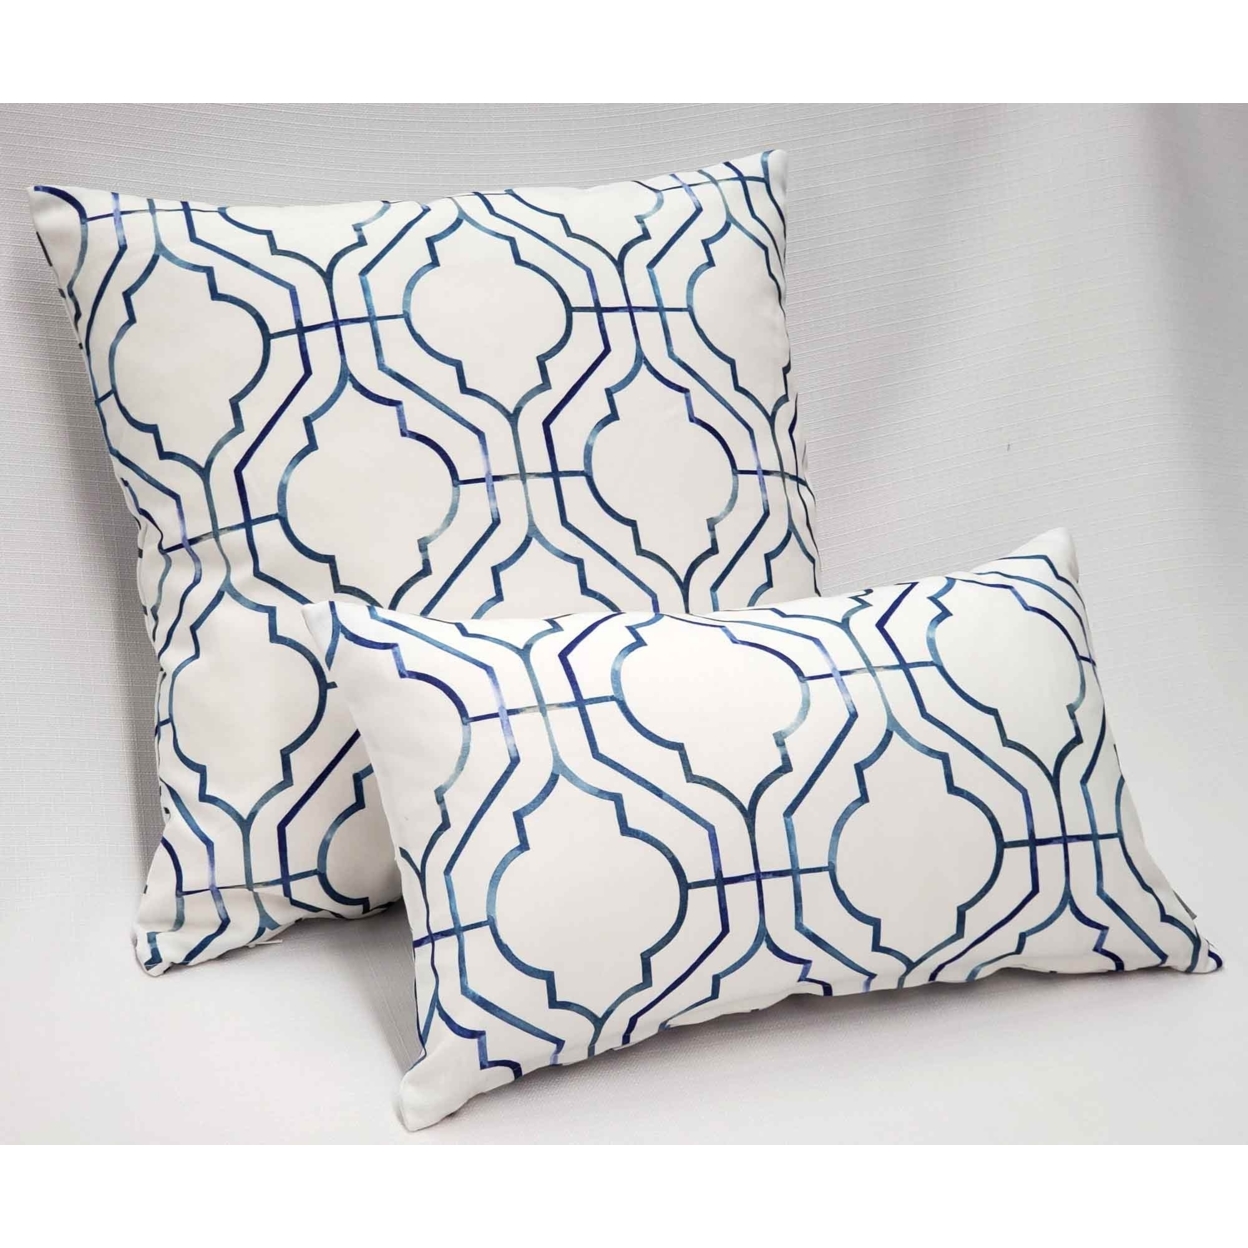 Biltmore Gate Blue Throw Pillow 12x20 Inches Square, Complete Pillow With Polyfill Pillow Insert